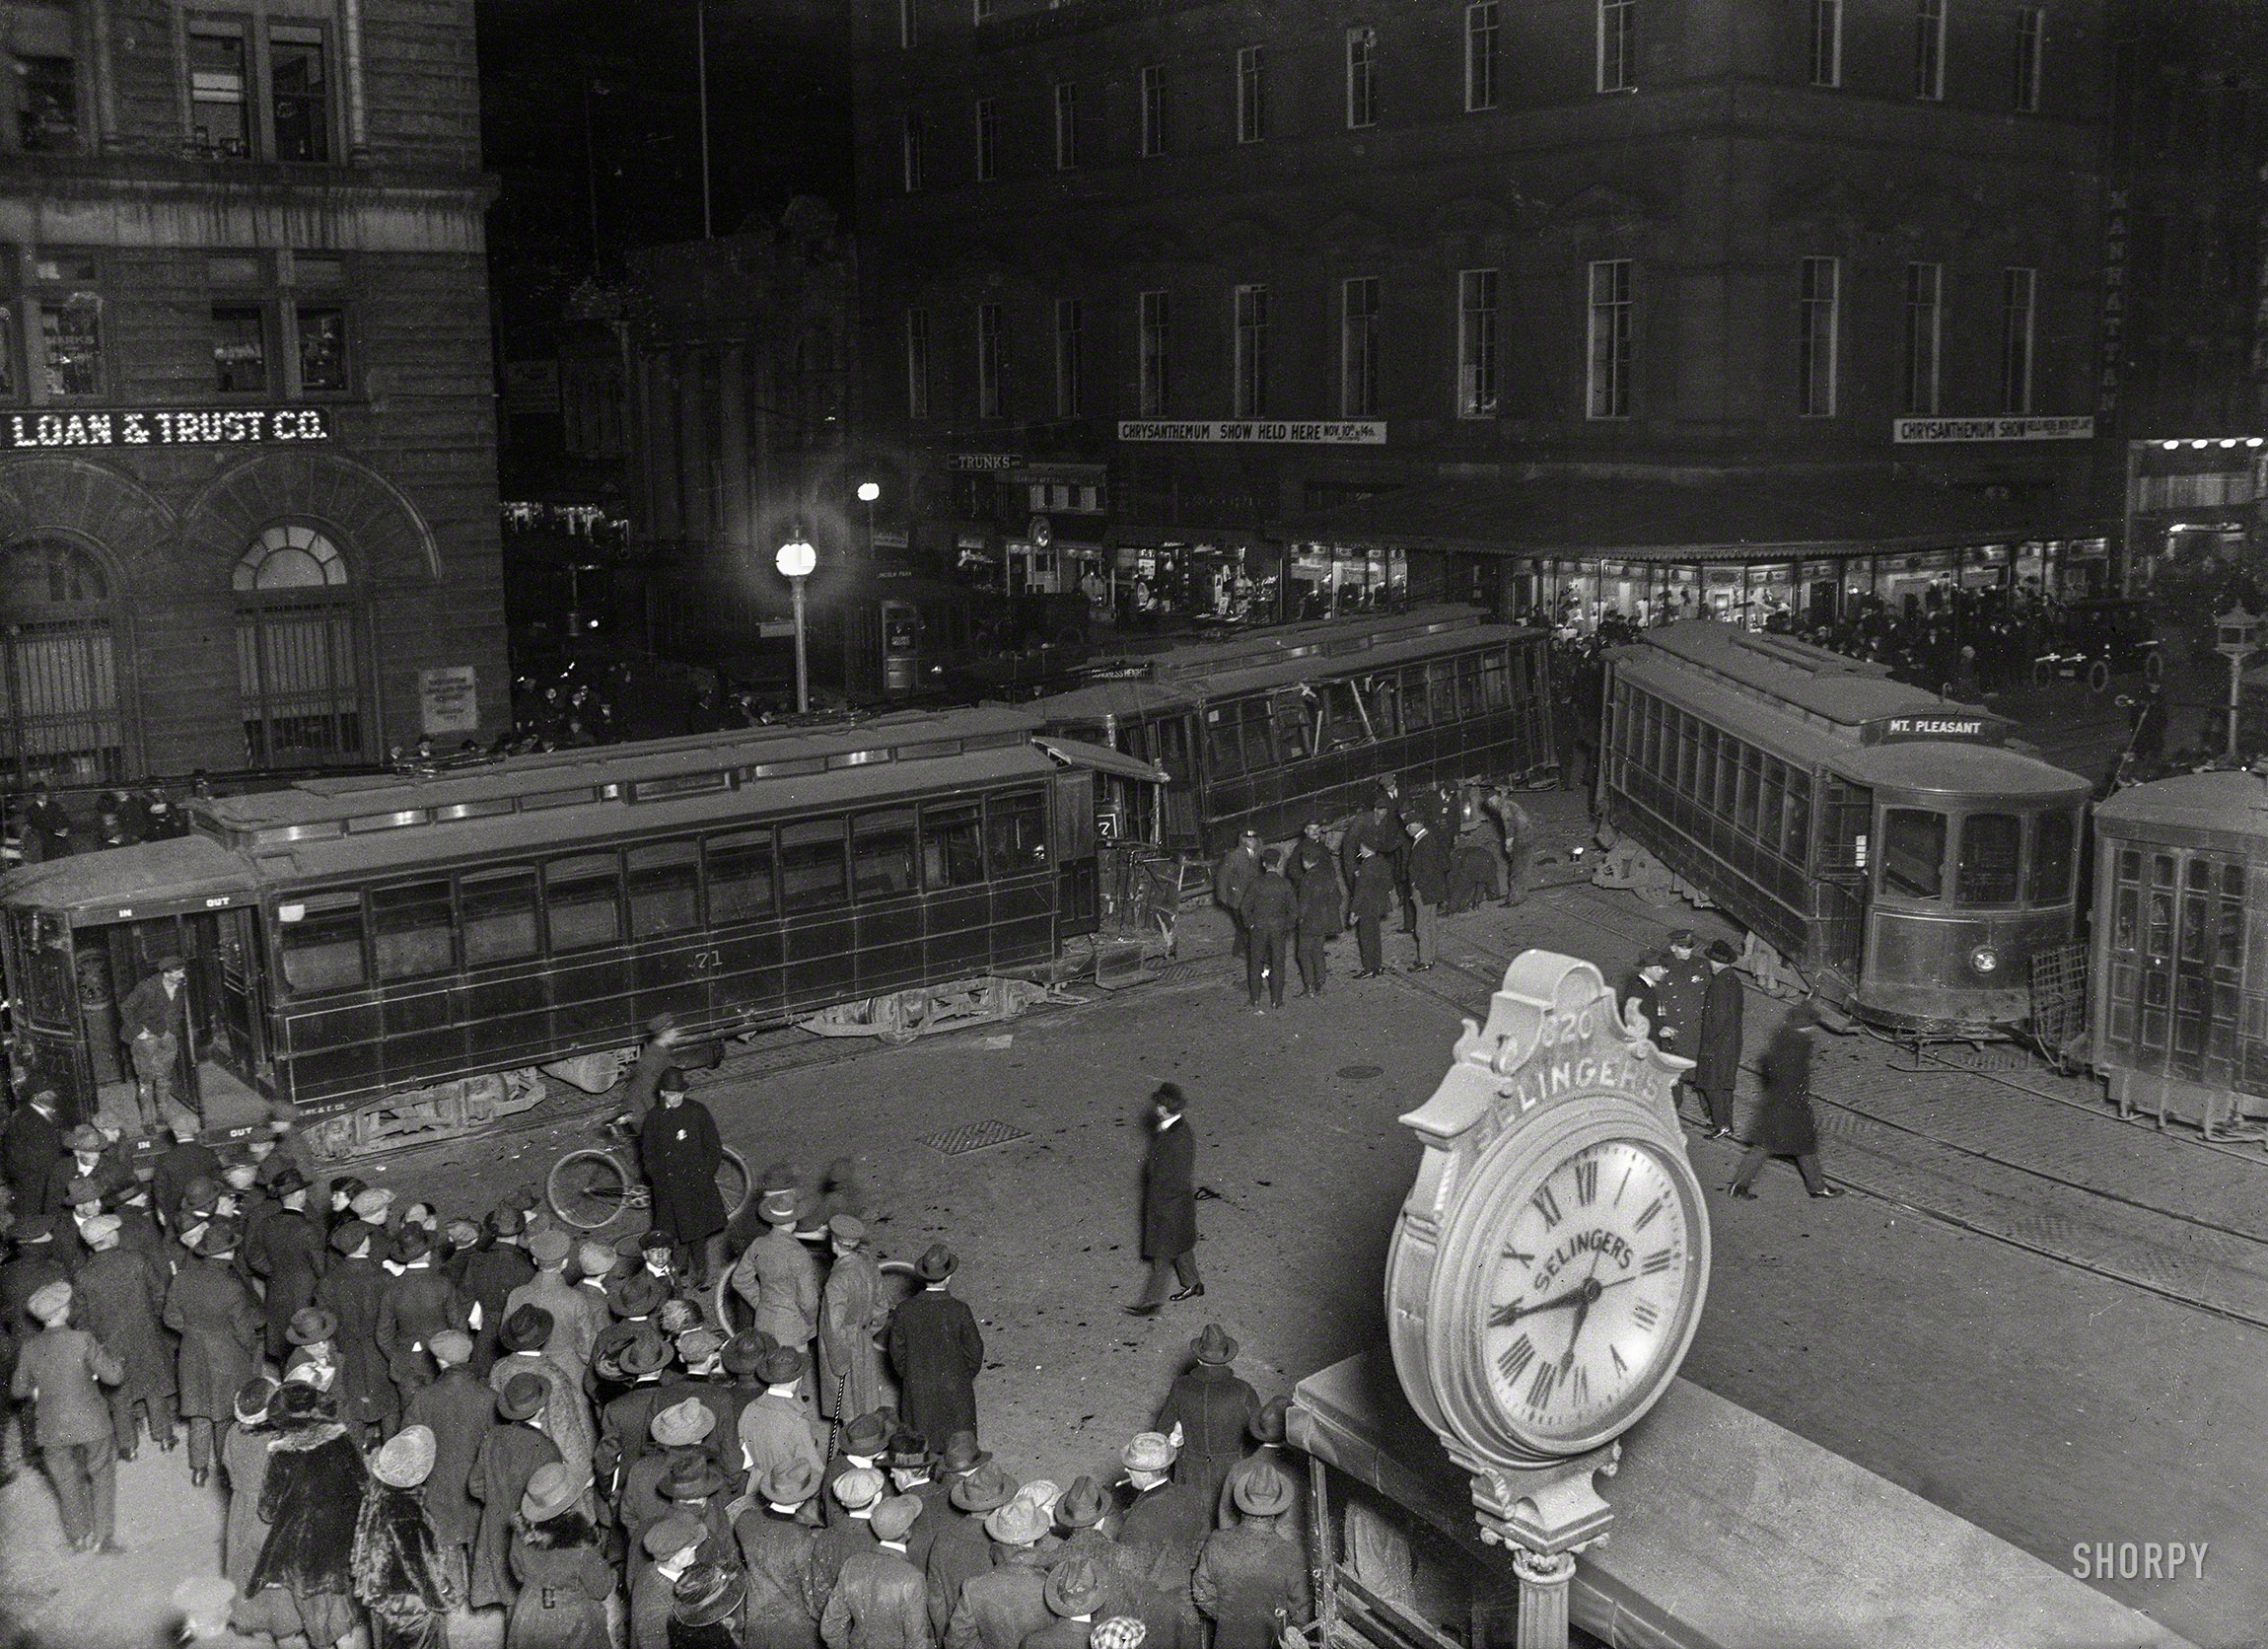 November 12, 1920. Washington, D.C. "14 PERSONS INJURED IN CRASH OF 3 CARS: Wreck at 9th and F Streets When Brakes Fail to Work Endangers Many Others. POLICEMEN LEAP TO SAFETY. More Than 2,000 Citizens Delayed an Hour in Getting Home ... " Harris & Ewing glass negative. View full size.